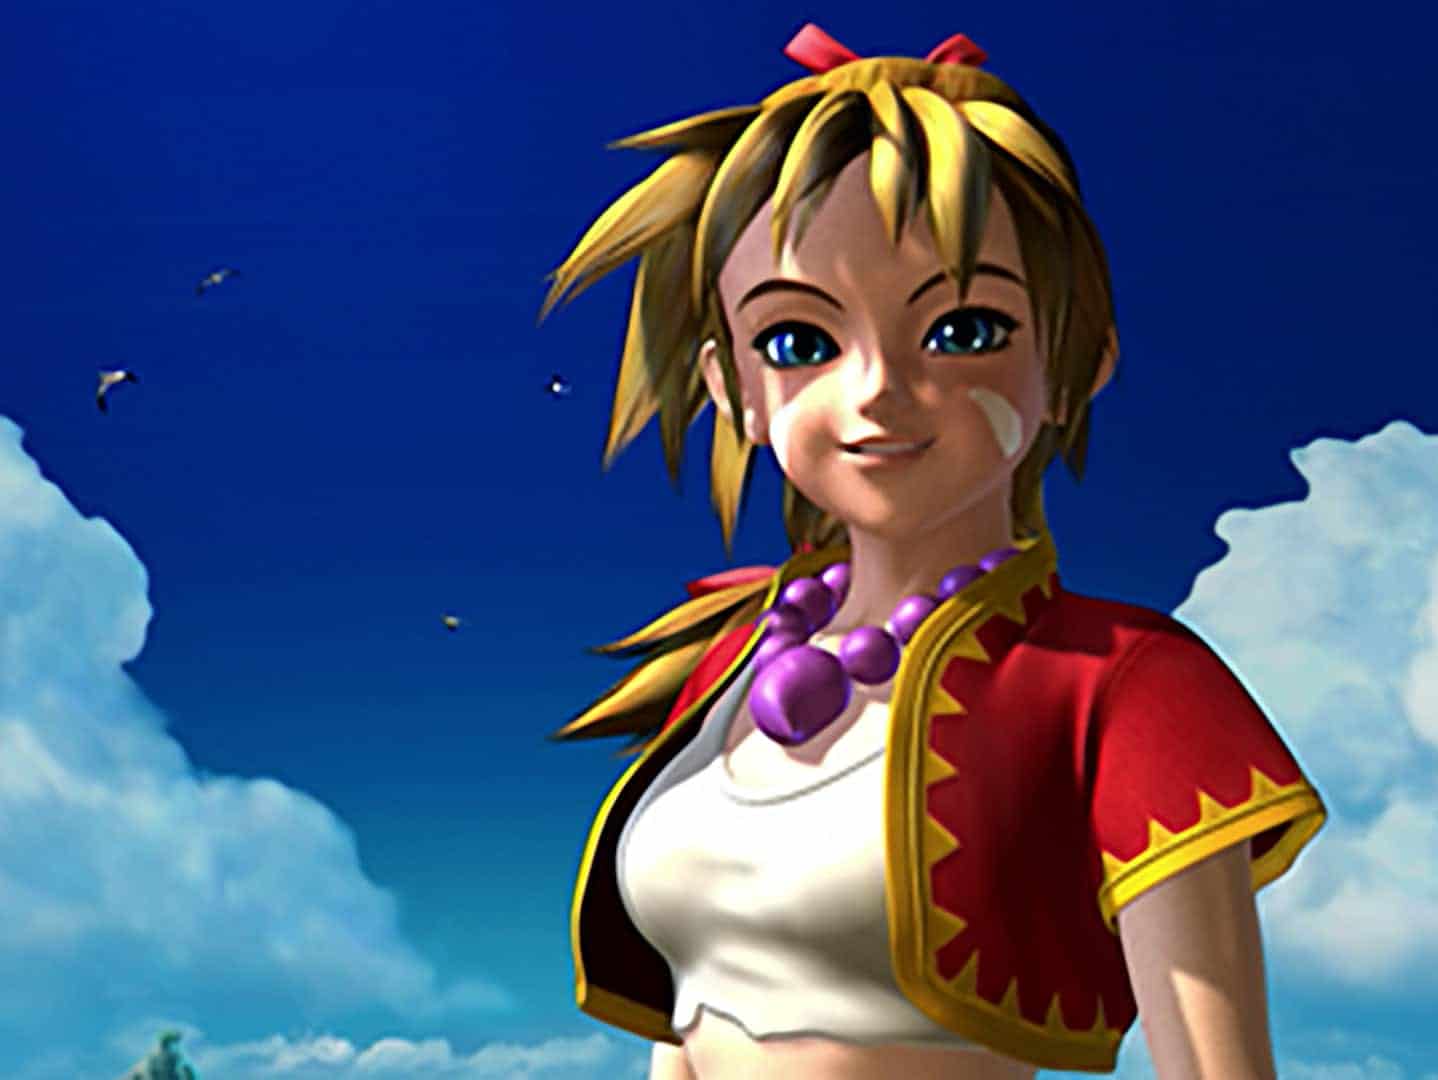 Chrono Cross: The Radical Dreamers Previews Rearranged Soundtrack; 8 Songs